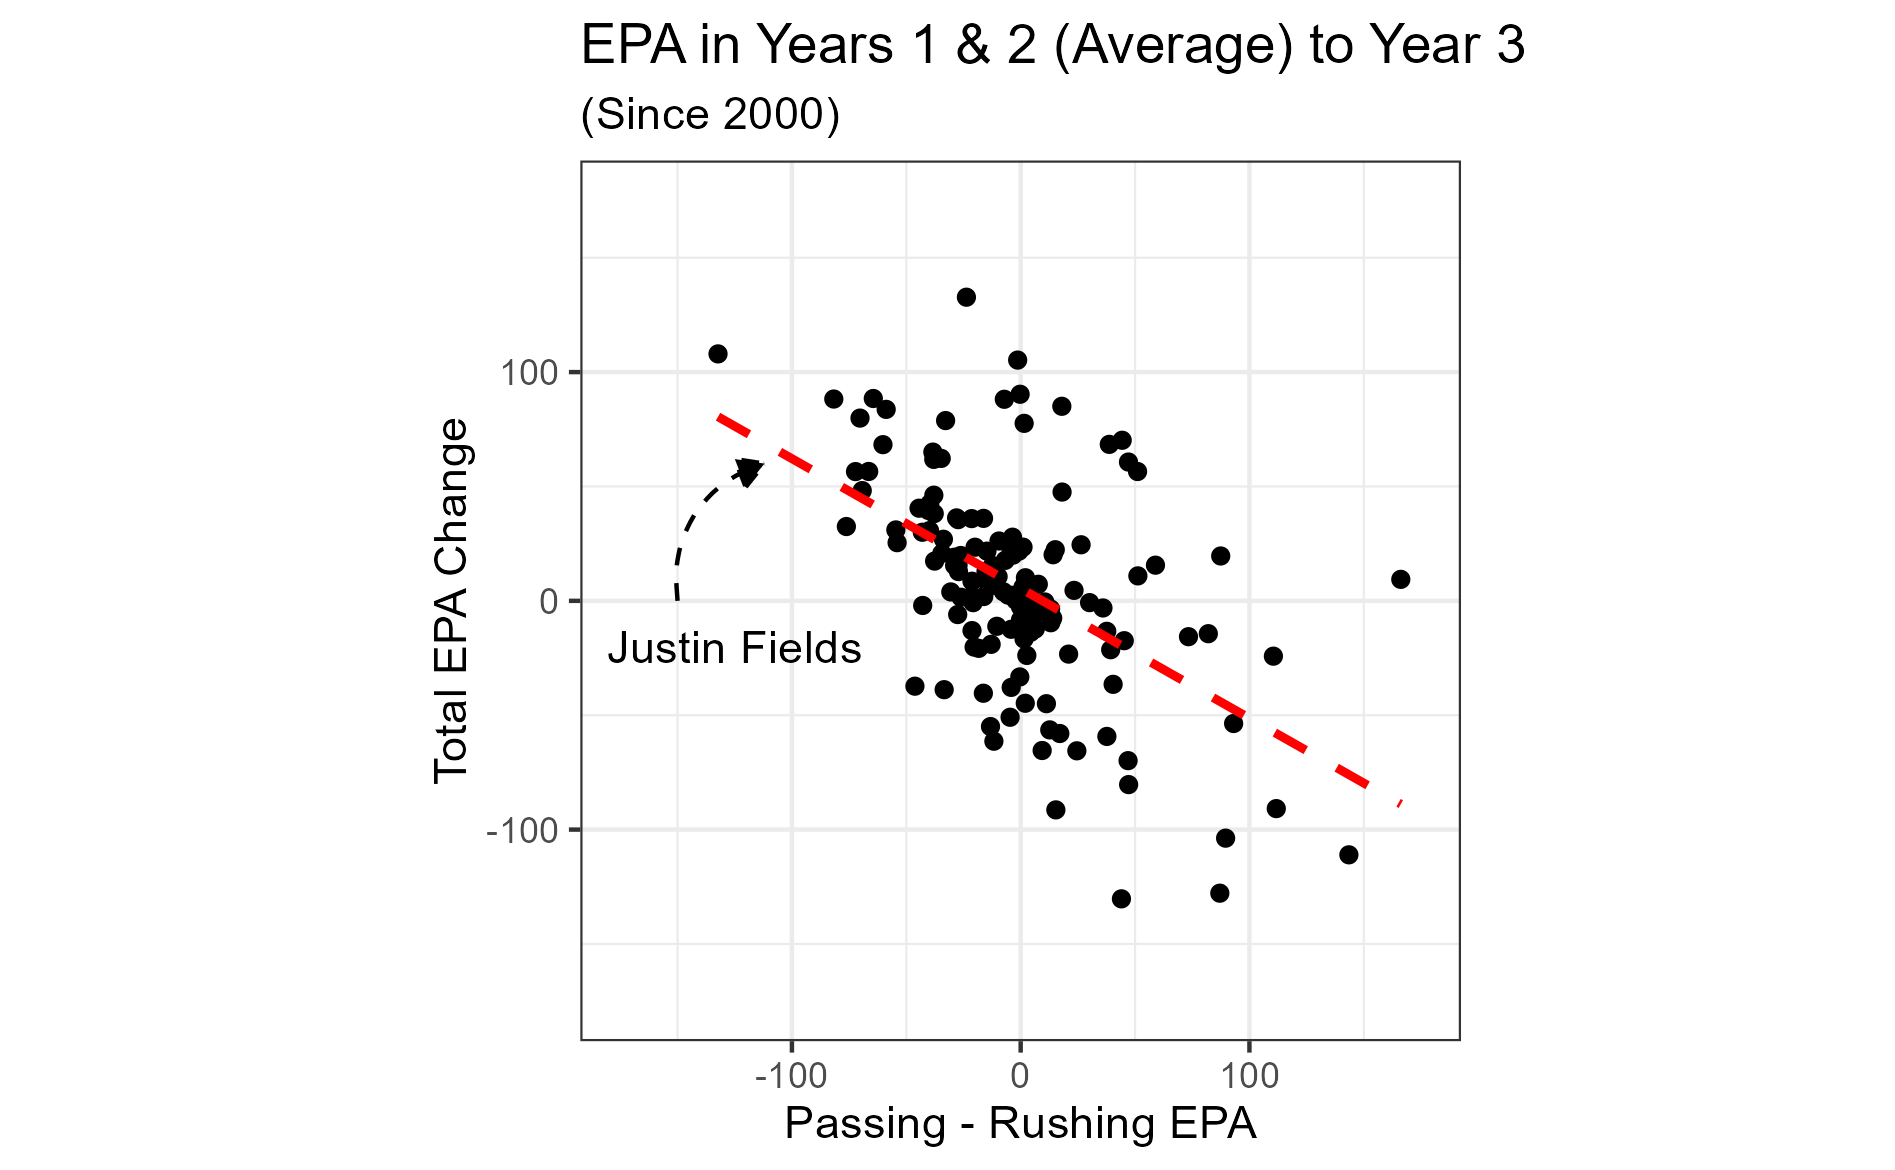 Chart showing EPA in Years 1&2 (Average) to Year 3 since 2000